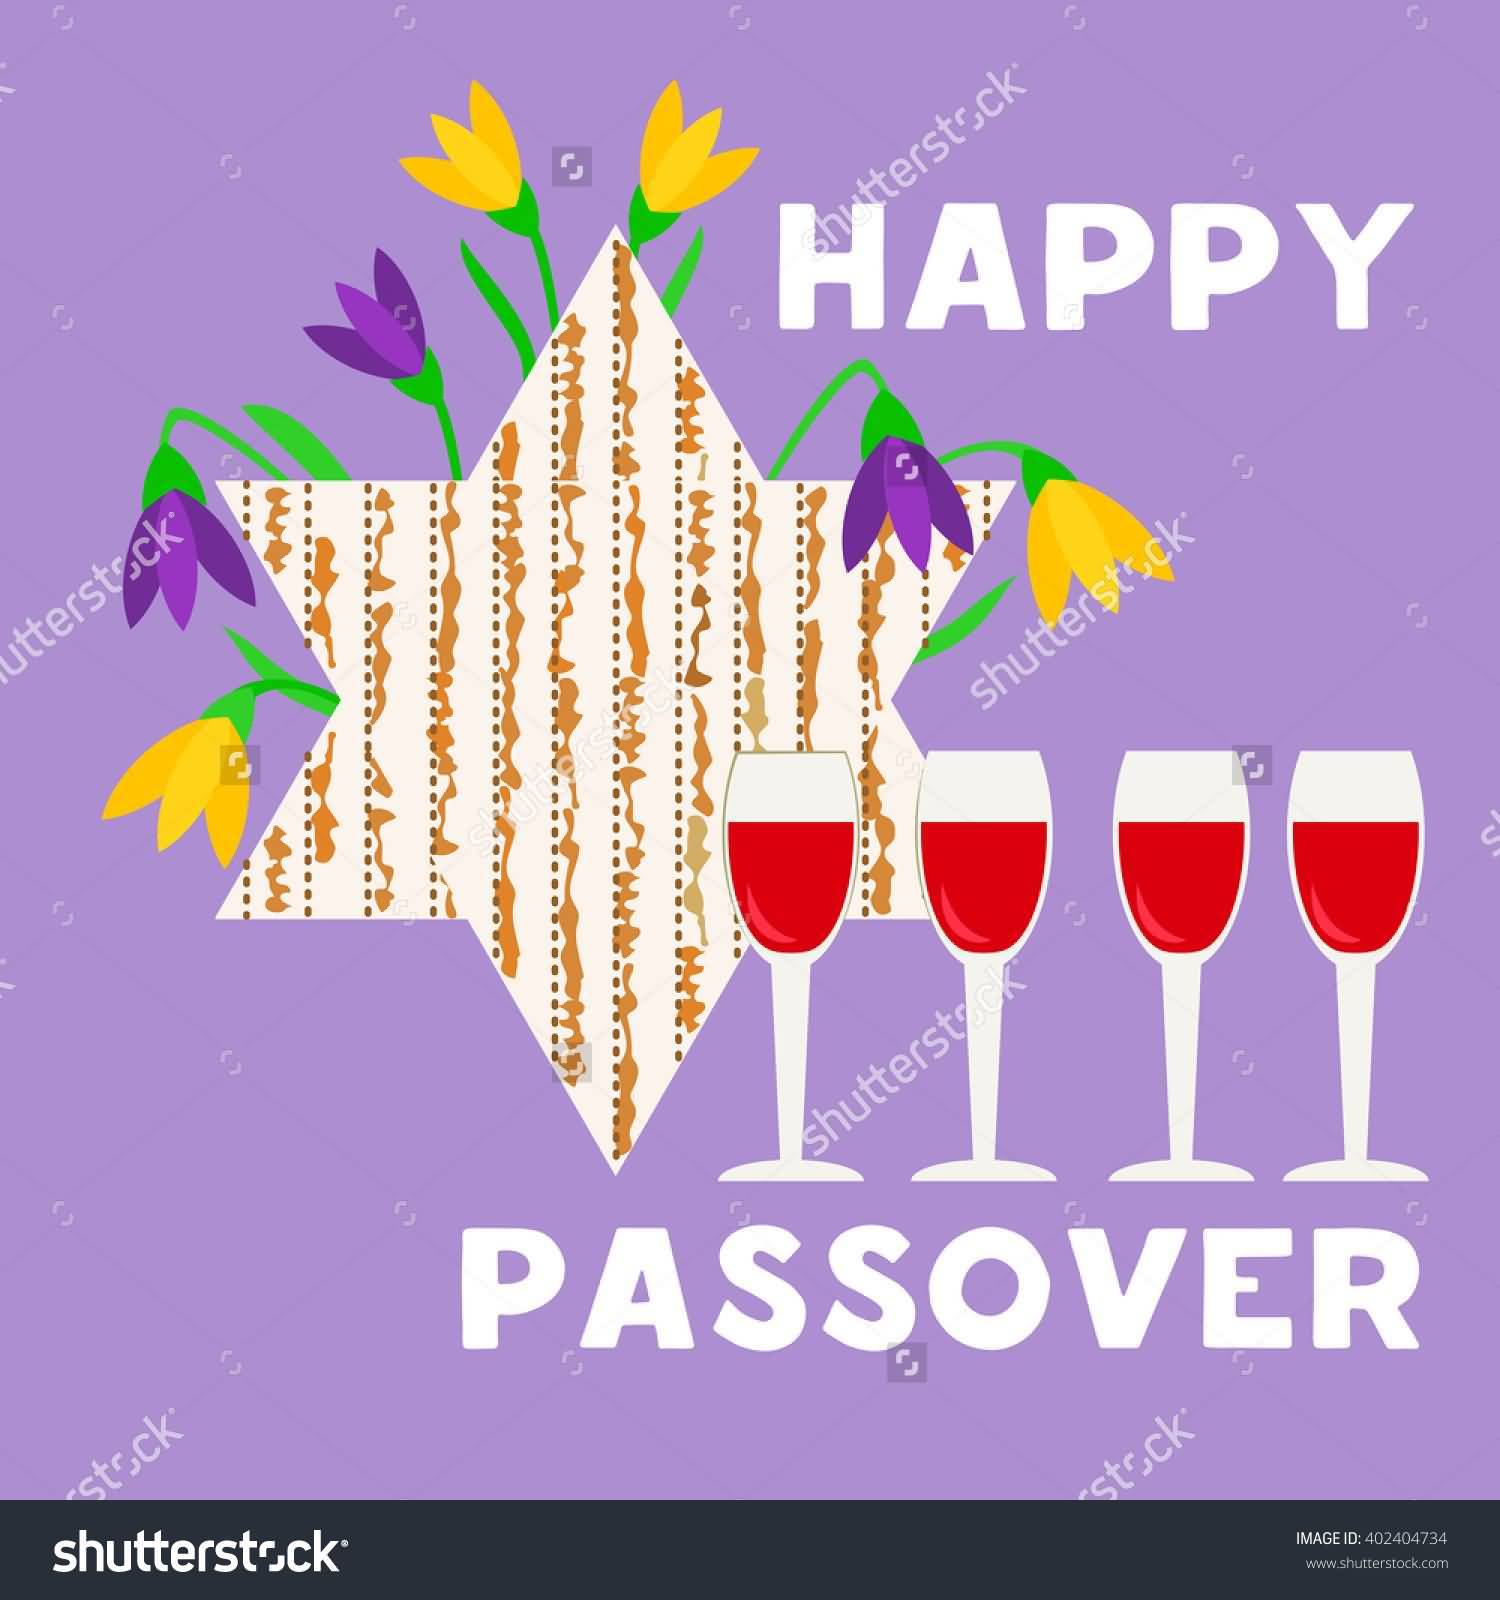 Happy Passover 2017 Wine Glasses And Star With Flowers